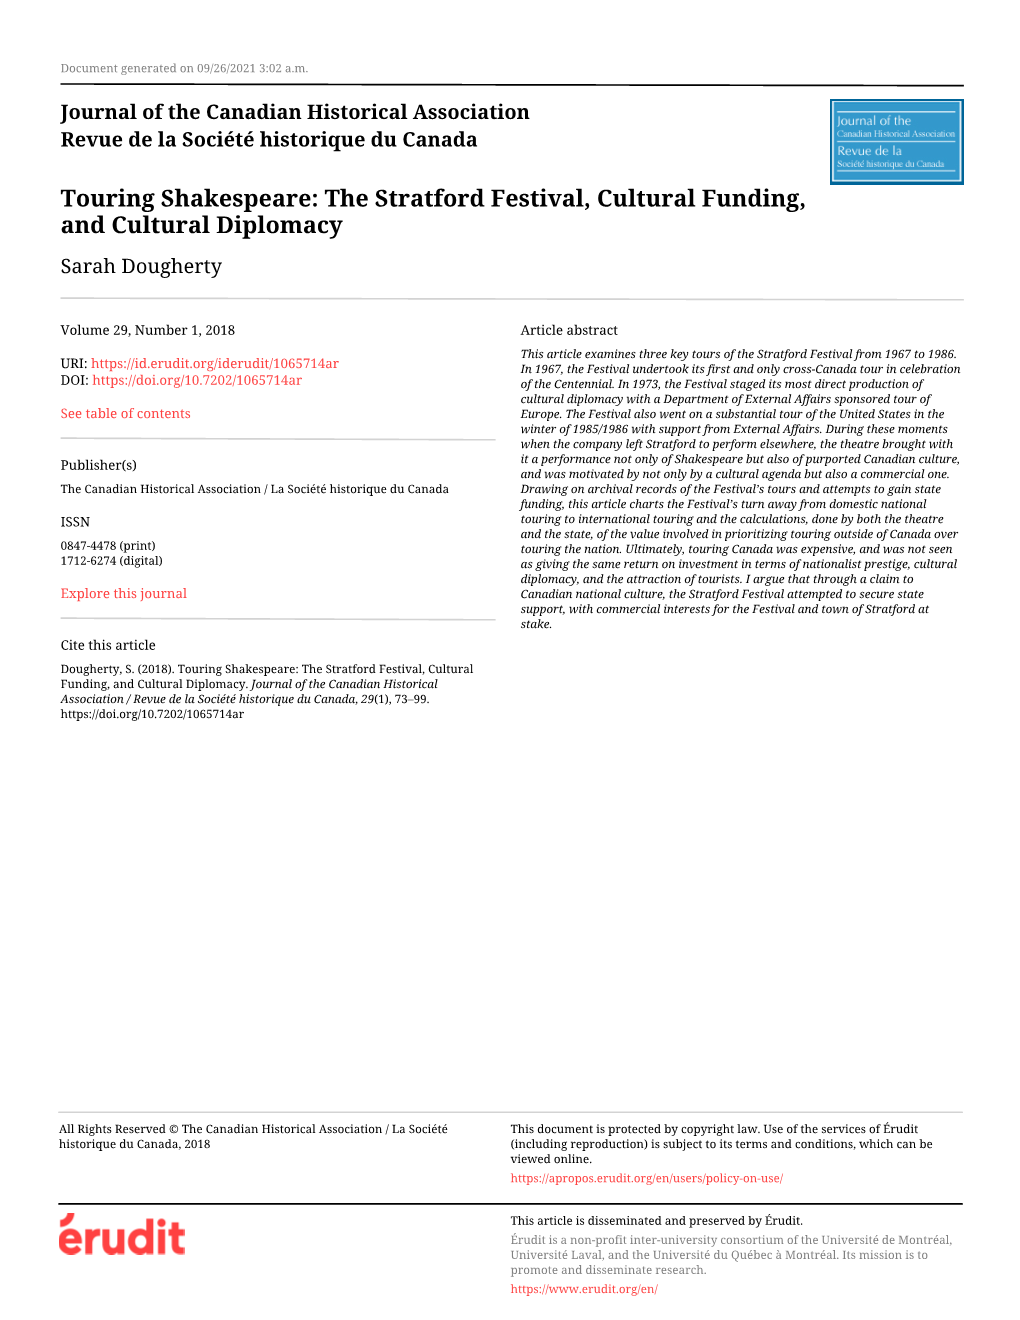 The Stratford Festival, Cultural Funding, and Cultural Diplomacy Sarah Dougherty